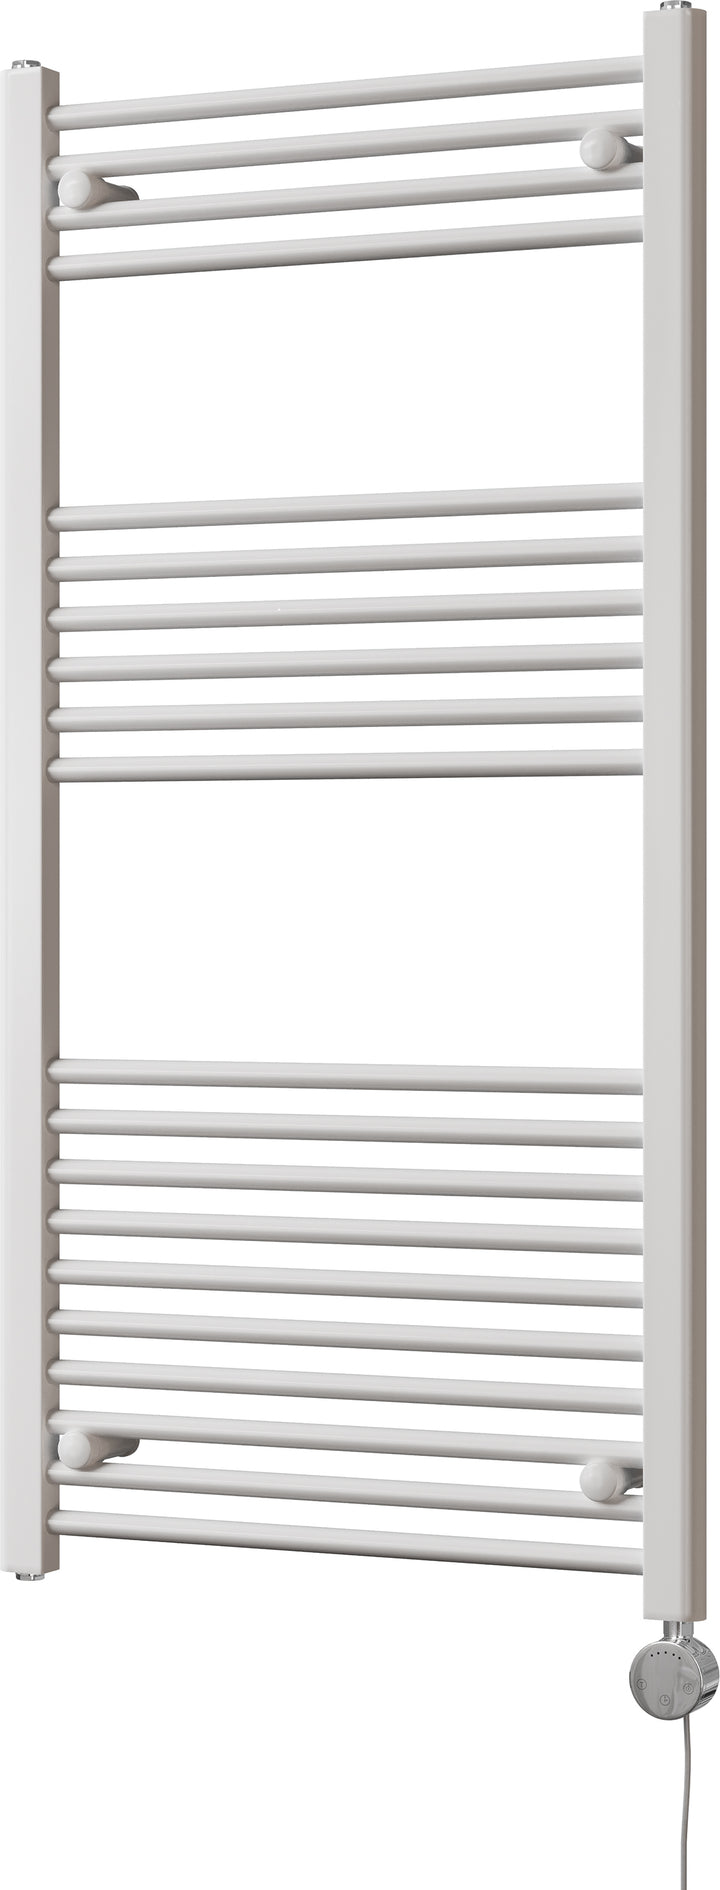 Zennor - White Electric Towel Rail H1200mm x W600mm Straight 600w Thermostatic